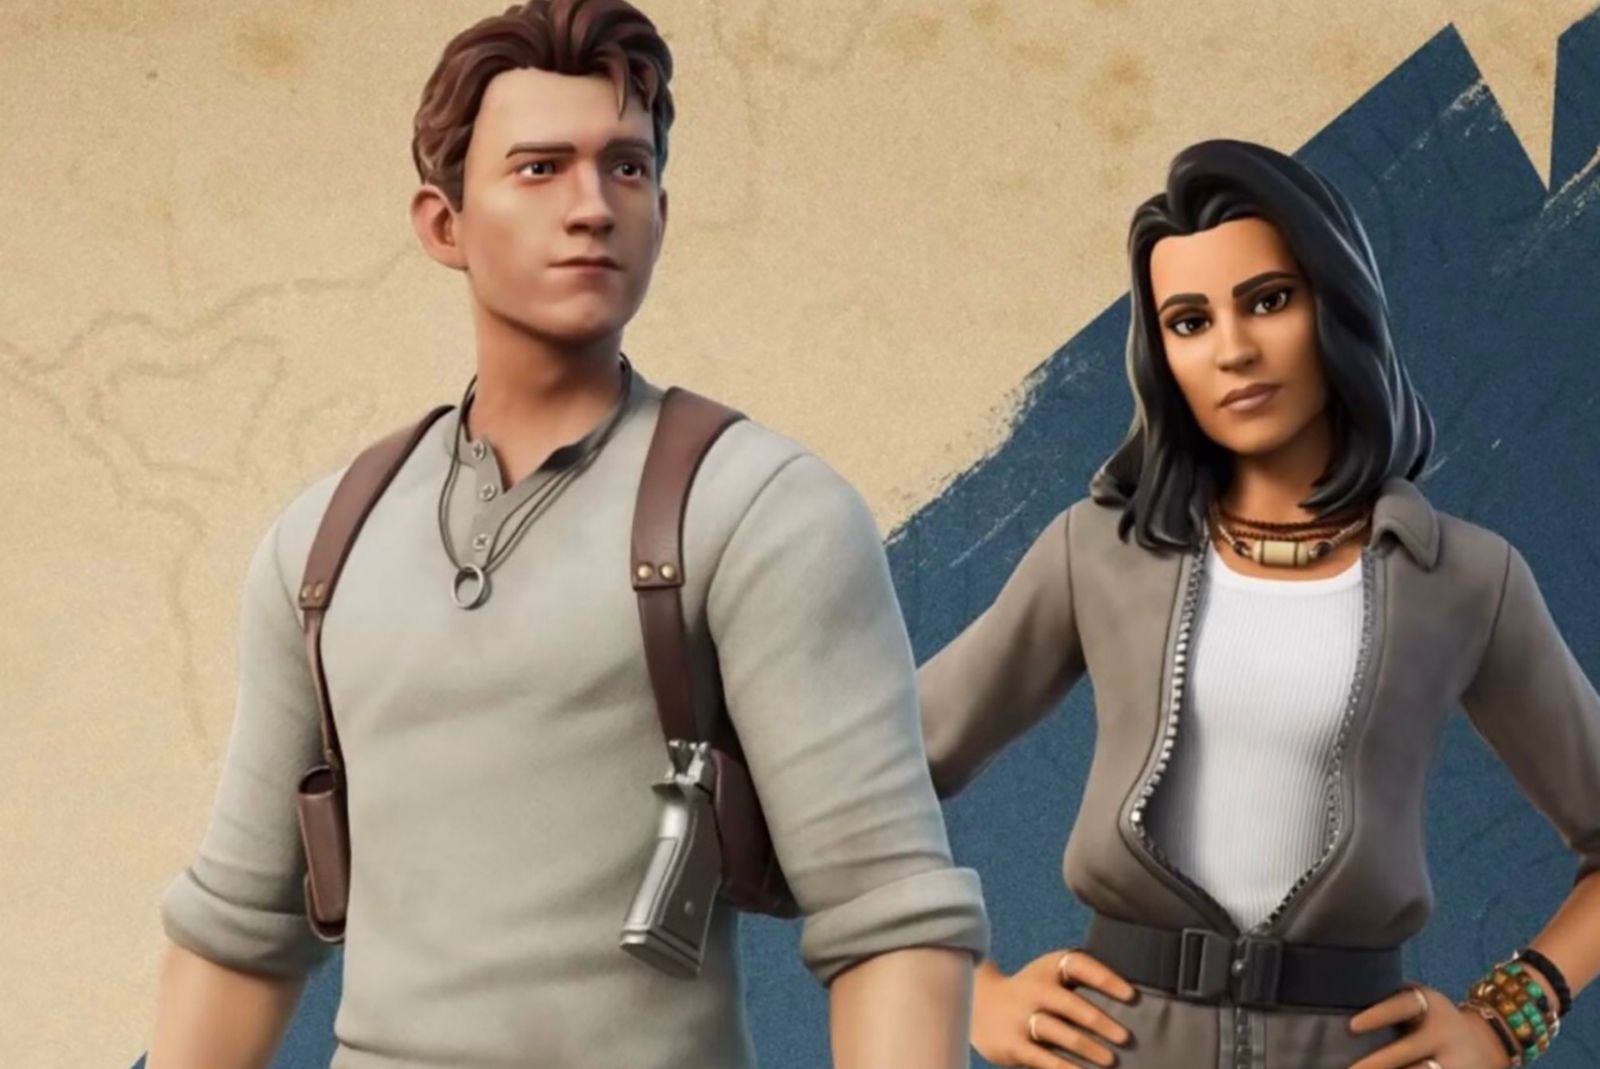 Uncharted-Fortnite crossover brings Nathan Drake to the game this